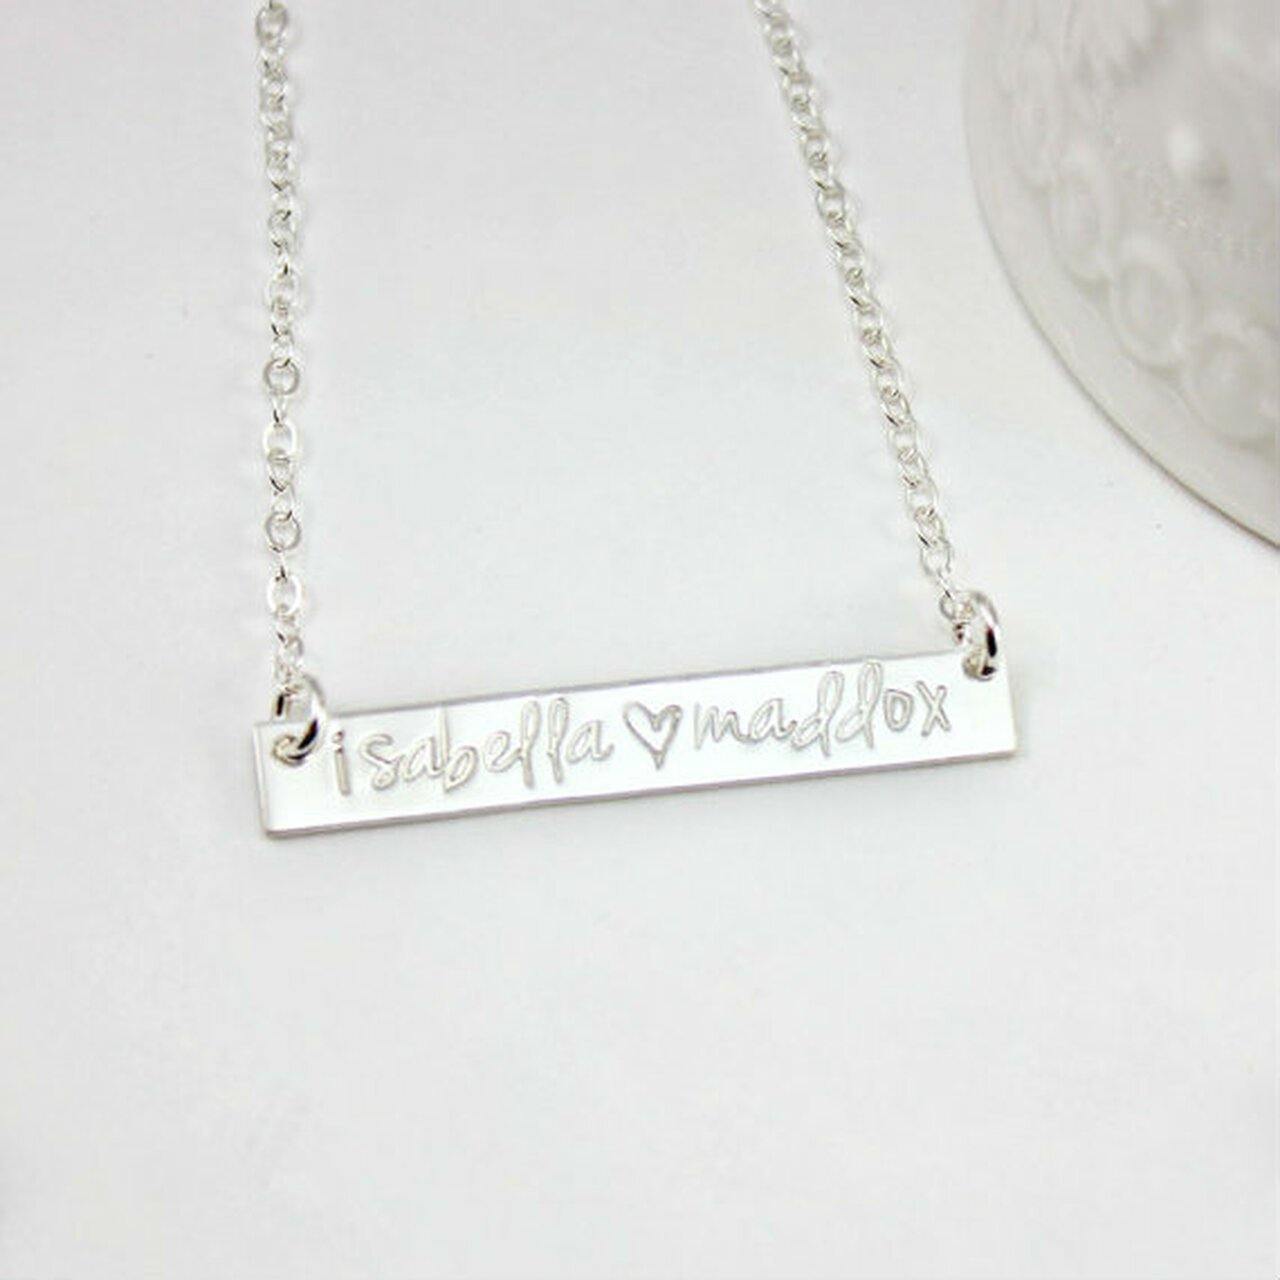 Silver Bar Necklace in Cursive - Going Golden